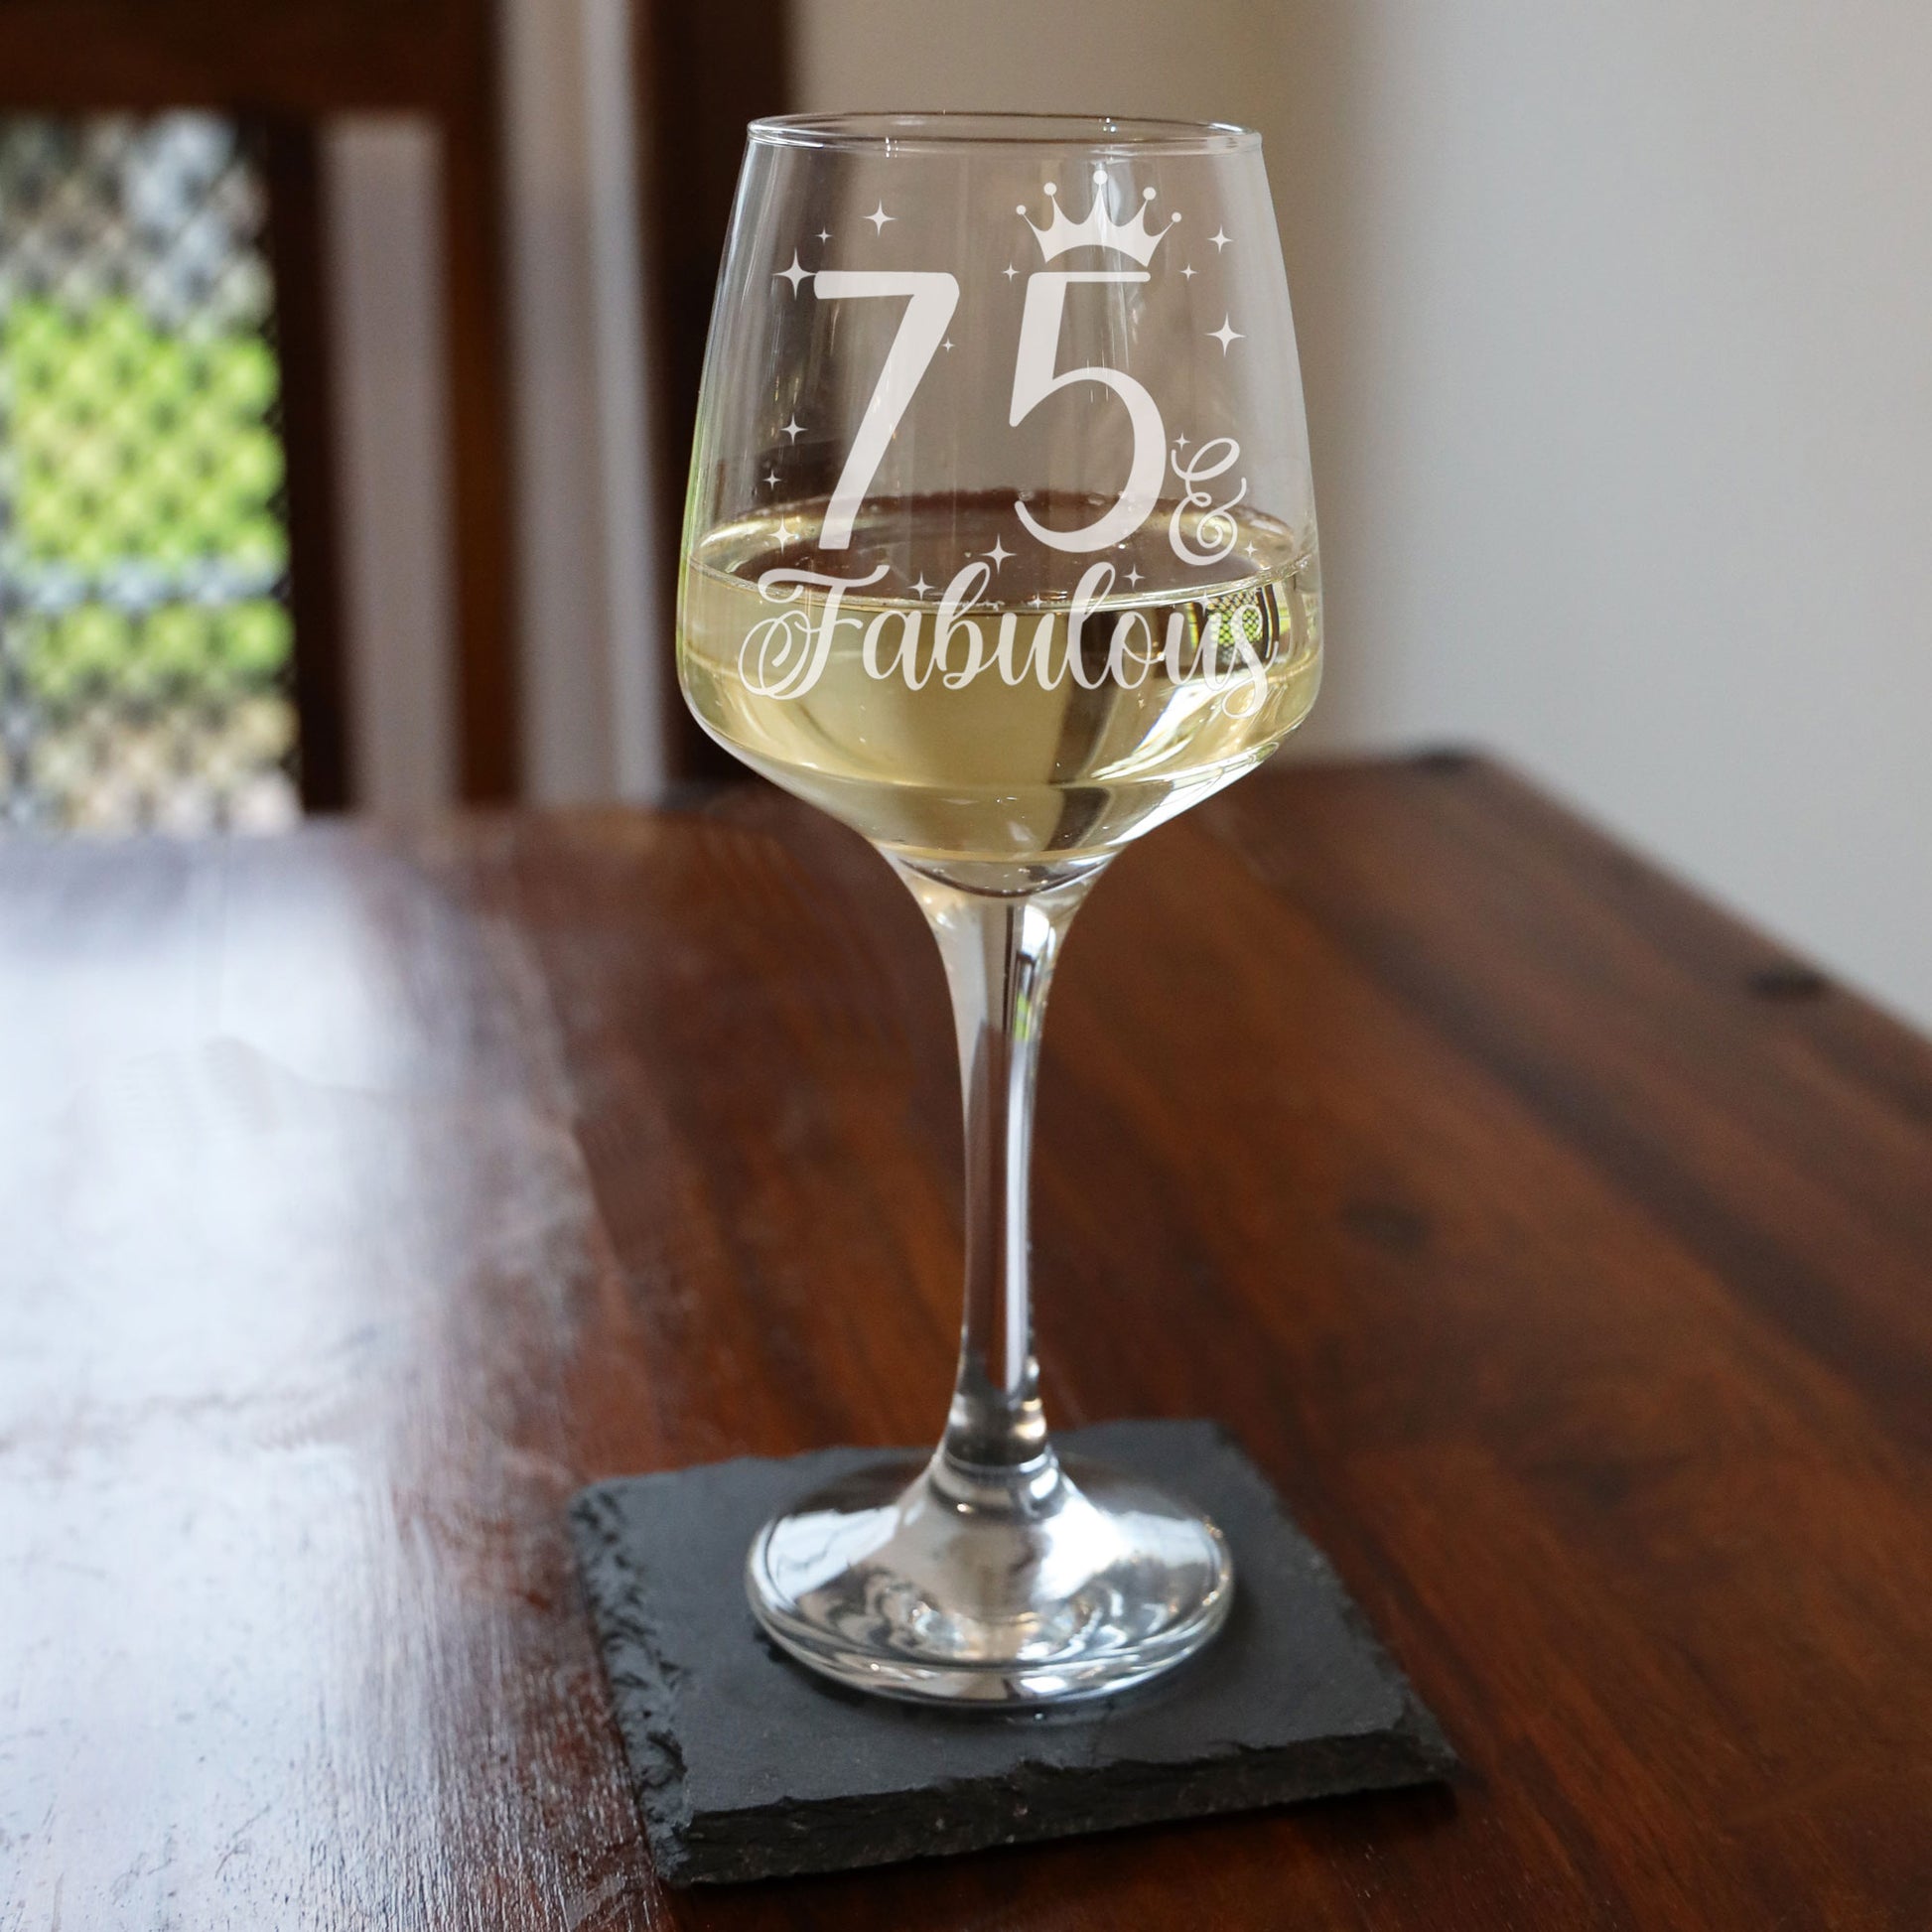 75 & Fabulous 75th Birthday Gift Engraved Wine Glass and/or Coaster Set  - Always Looking Good - Wine Glass Only  